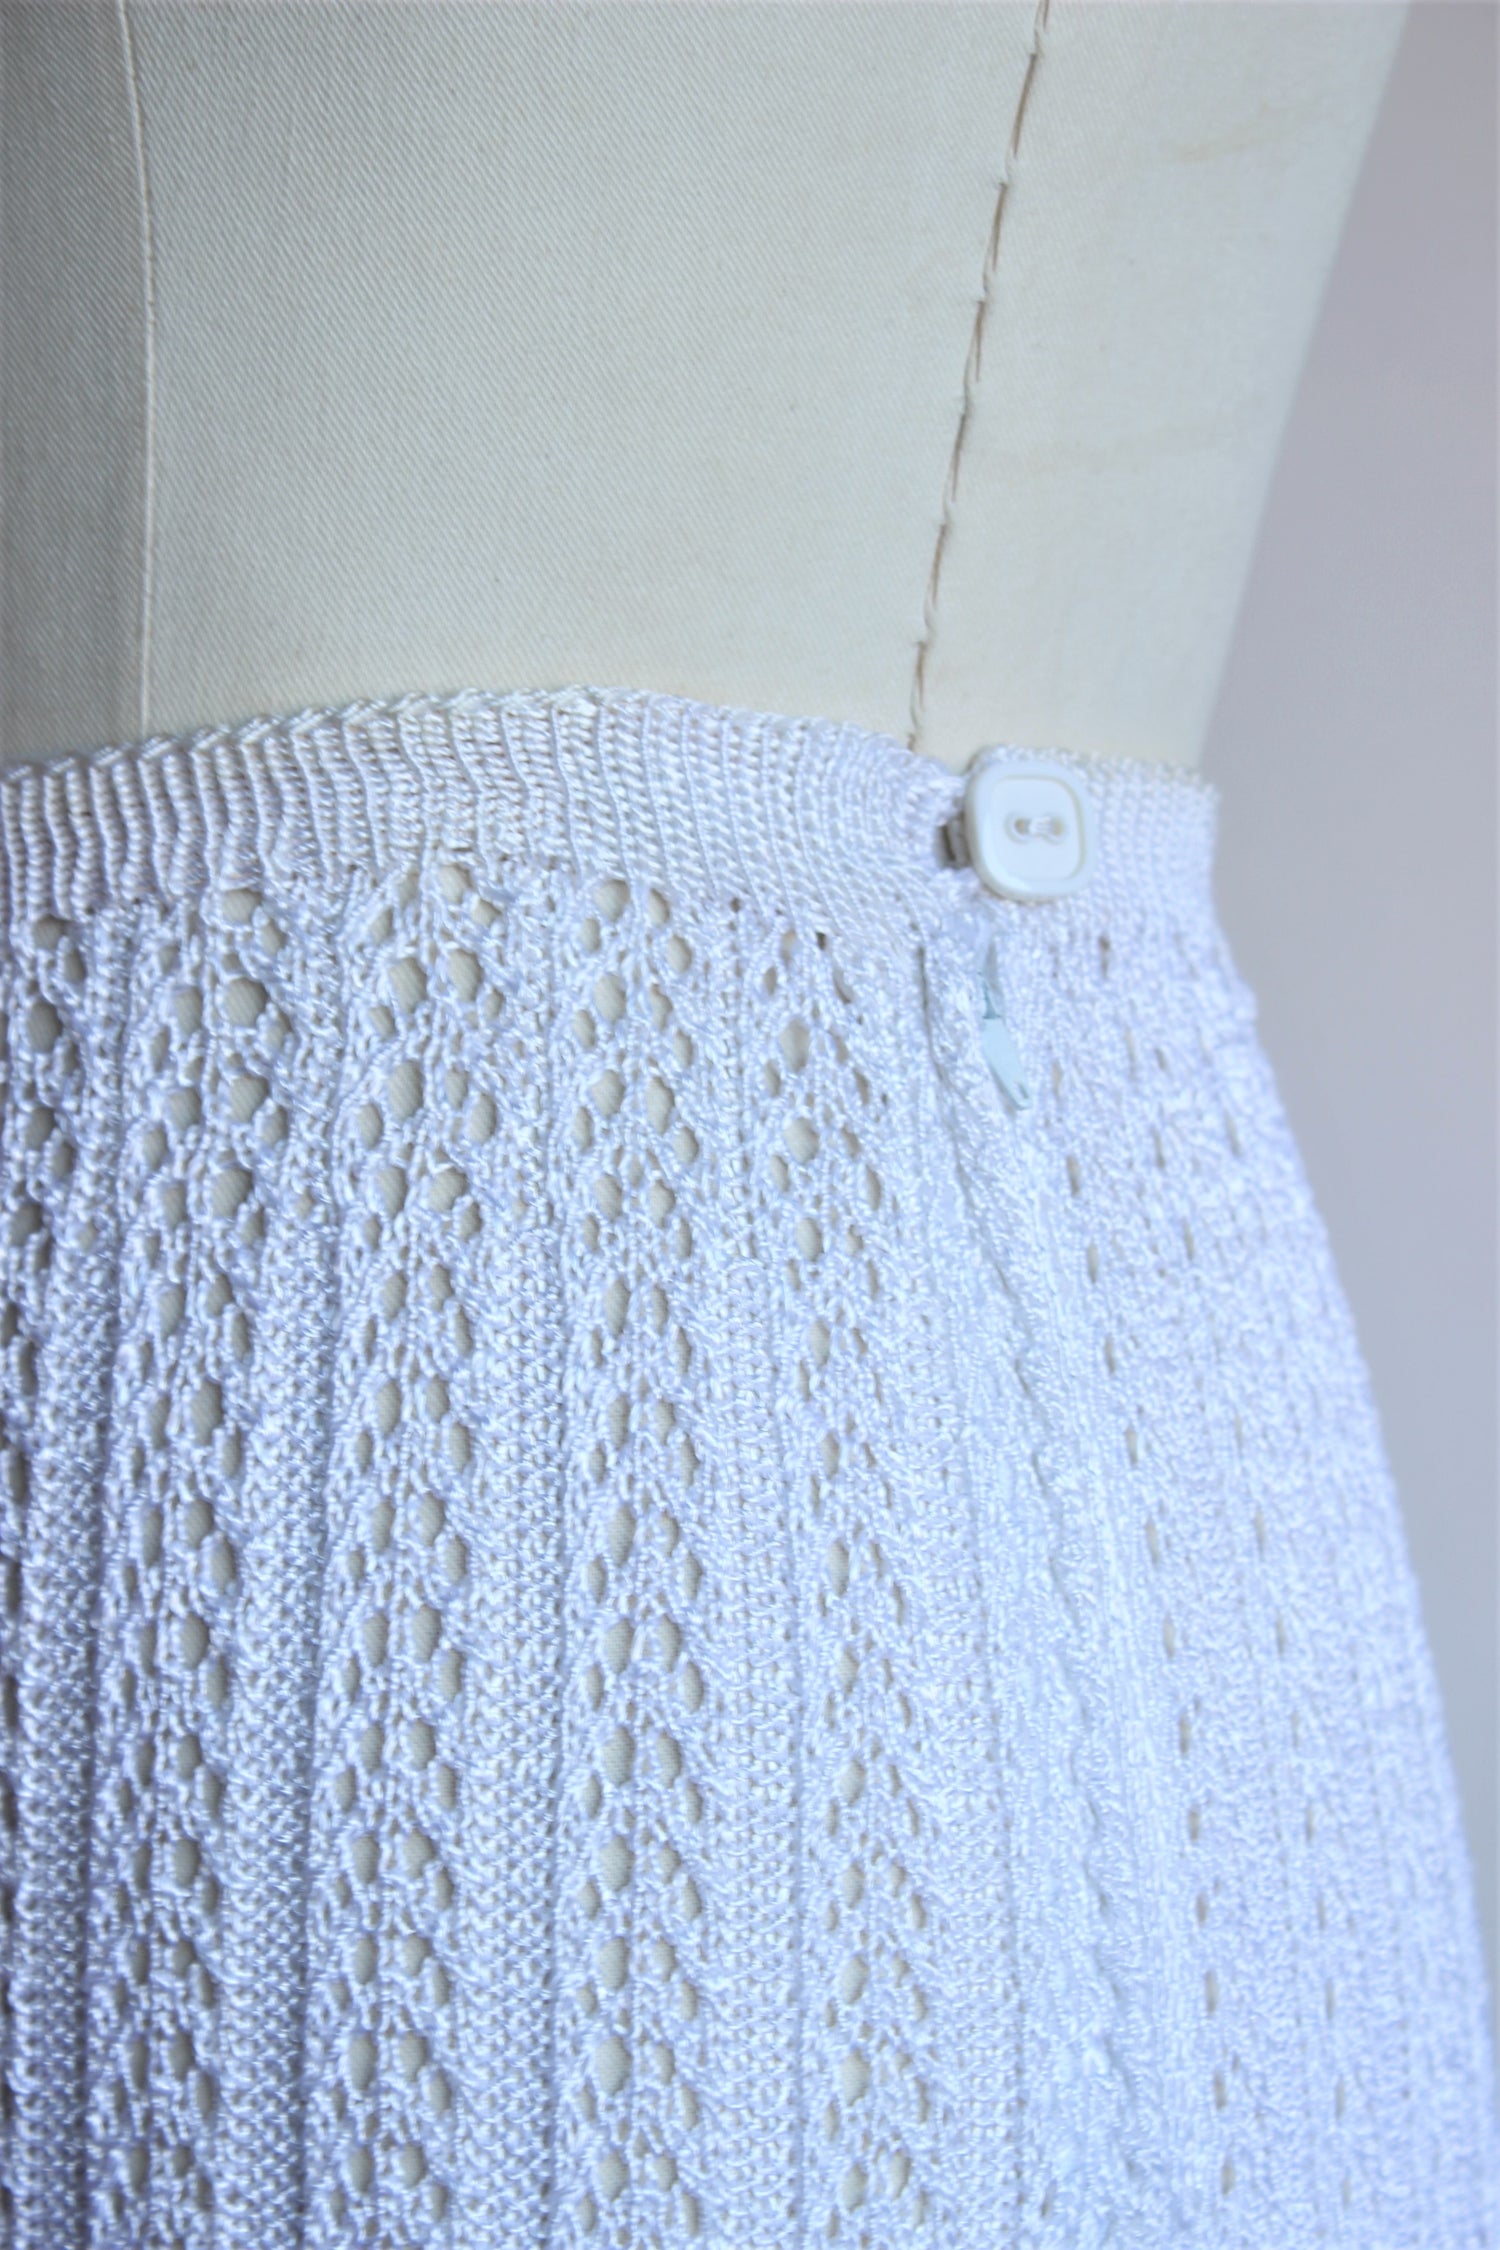 Vintage 1970s Does 1940s White Knit Skirt